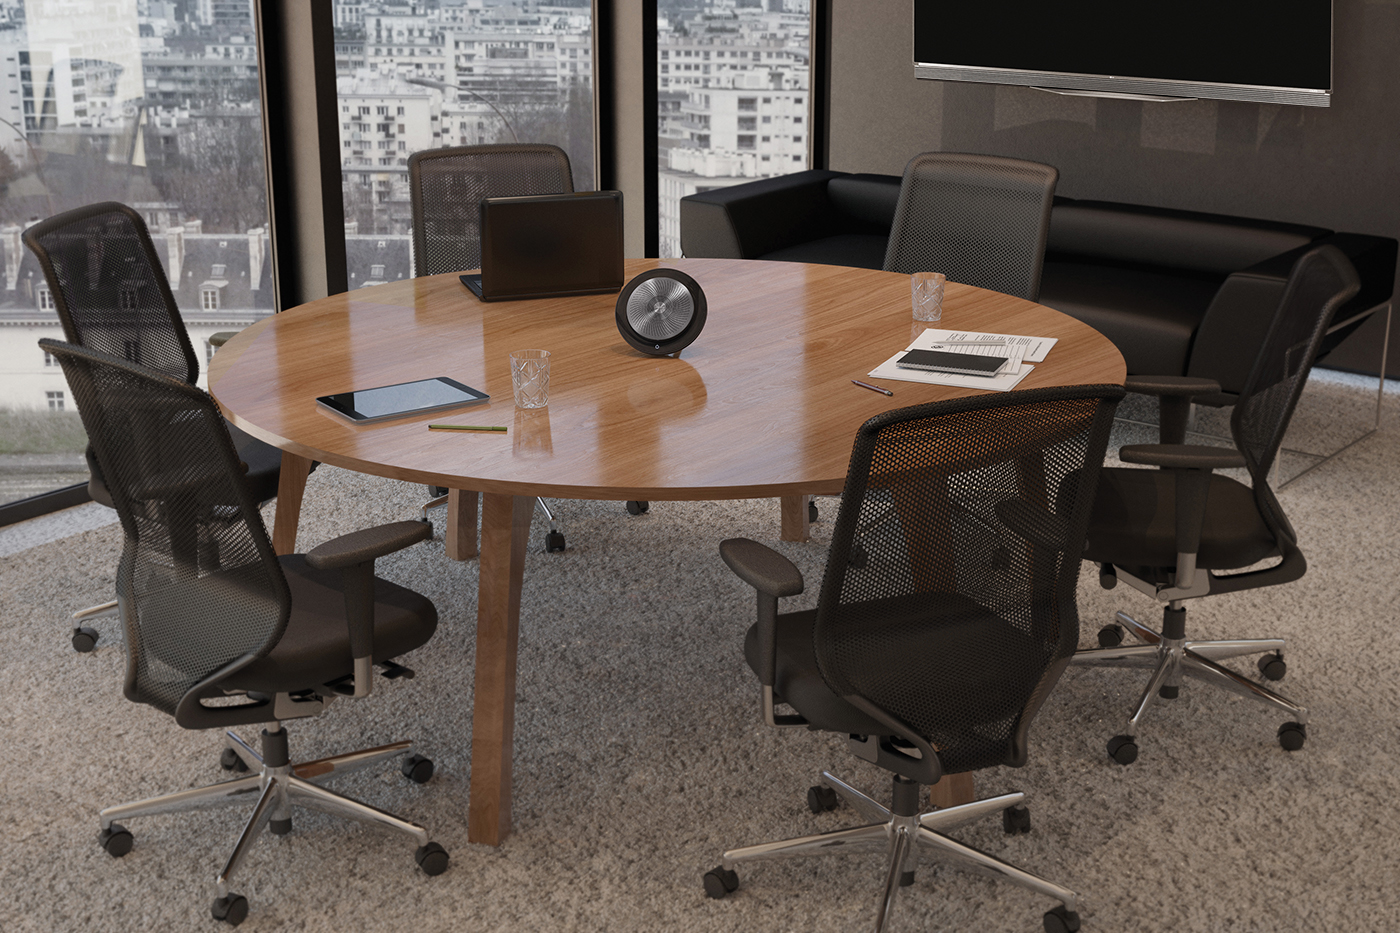 Jabra’s Speak 710 lets you take the boardroom with you